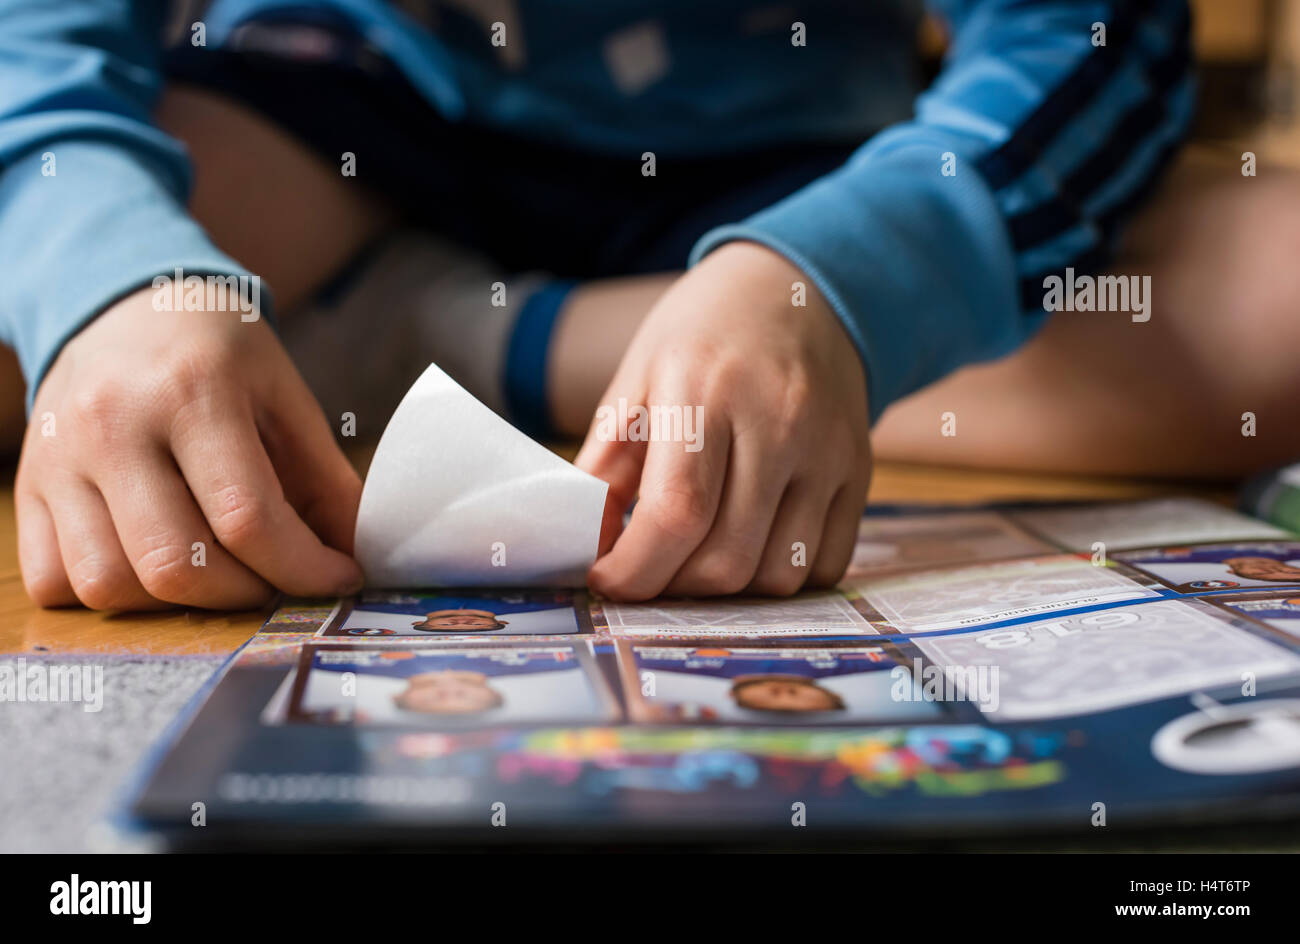 An 8 year old boy is pasting football trading cards into his sticker collection scrapbook. Stock Photo